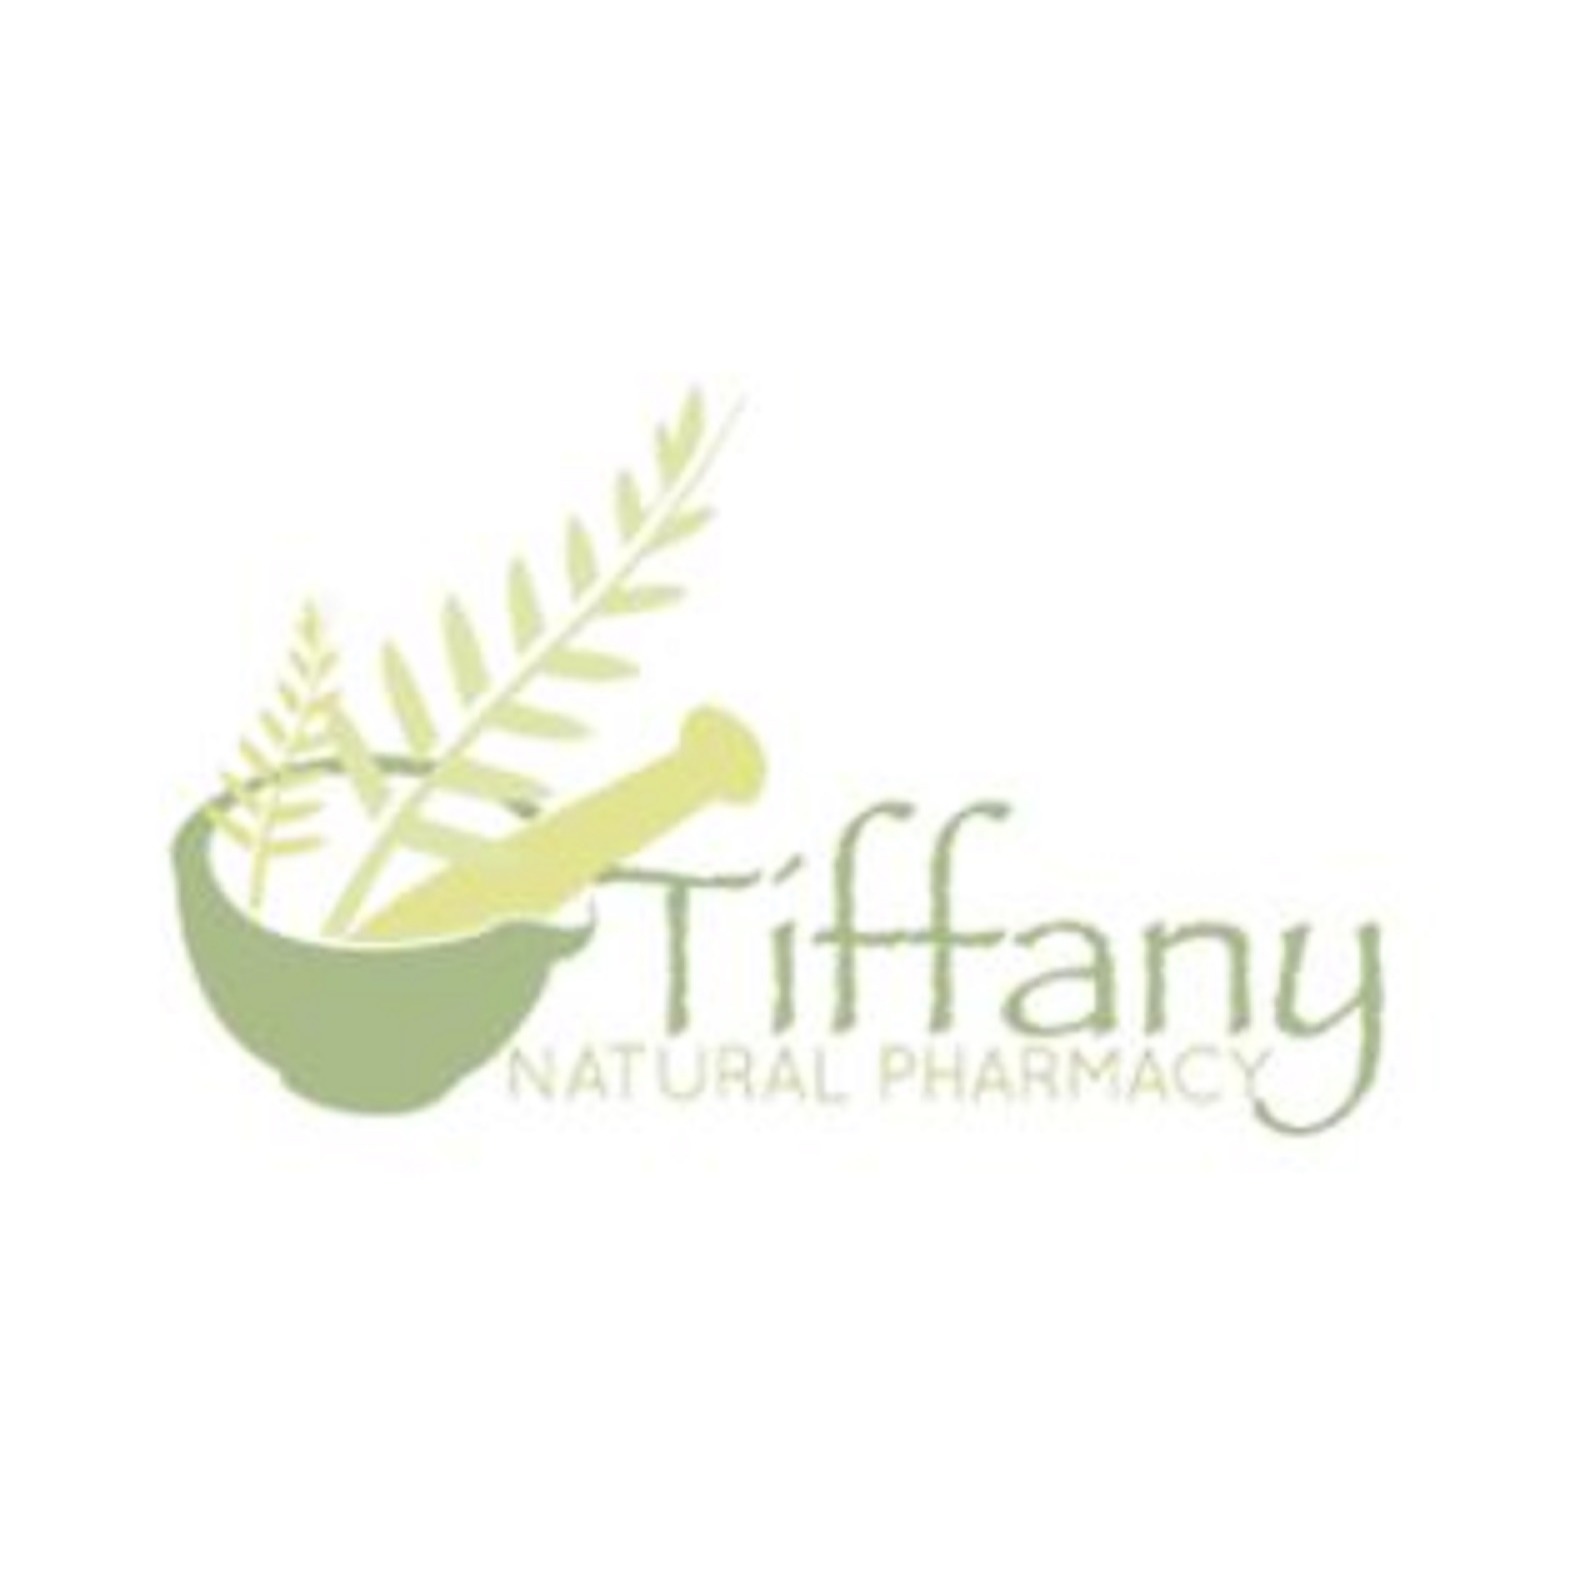 Tiffany Natural Pharmacy & Compounding Center - Westfield, NJ 07090 - (908)233-2200 | ShowMeLocal.com